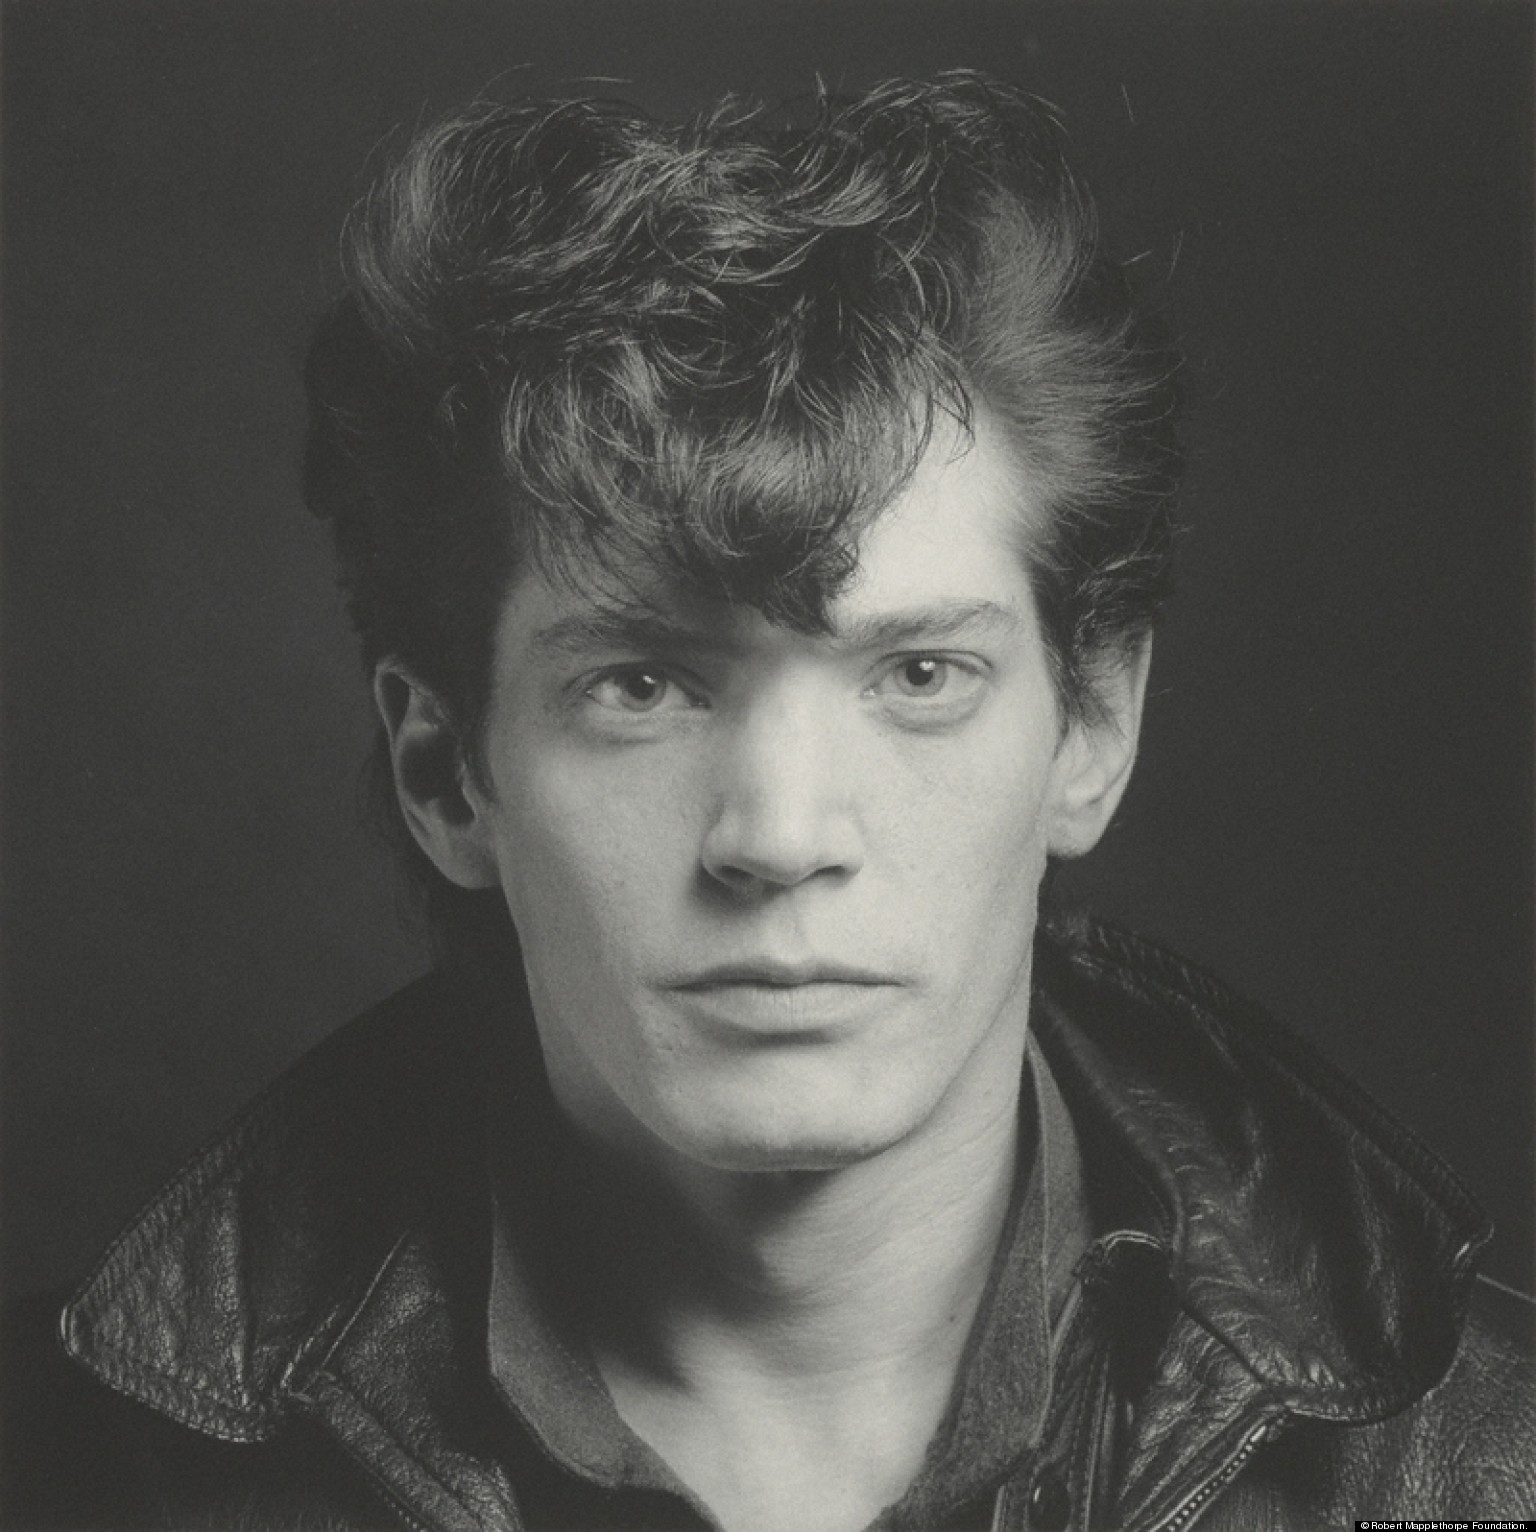 People and Place: Exhibition - Robert Mapplethorpe